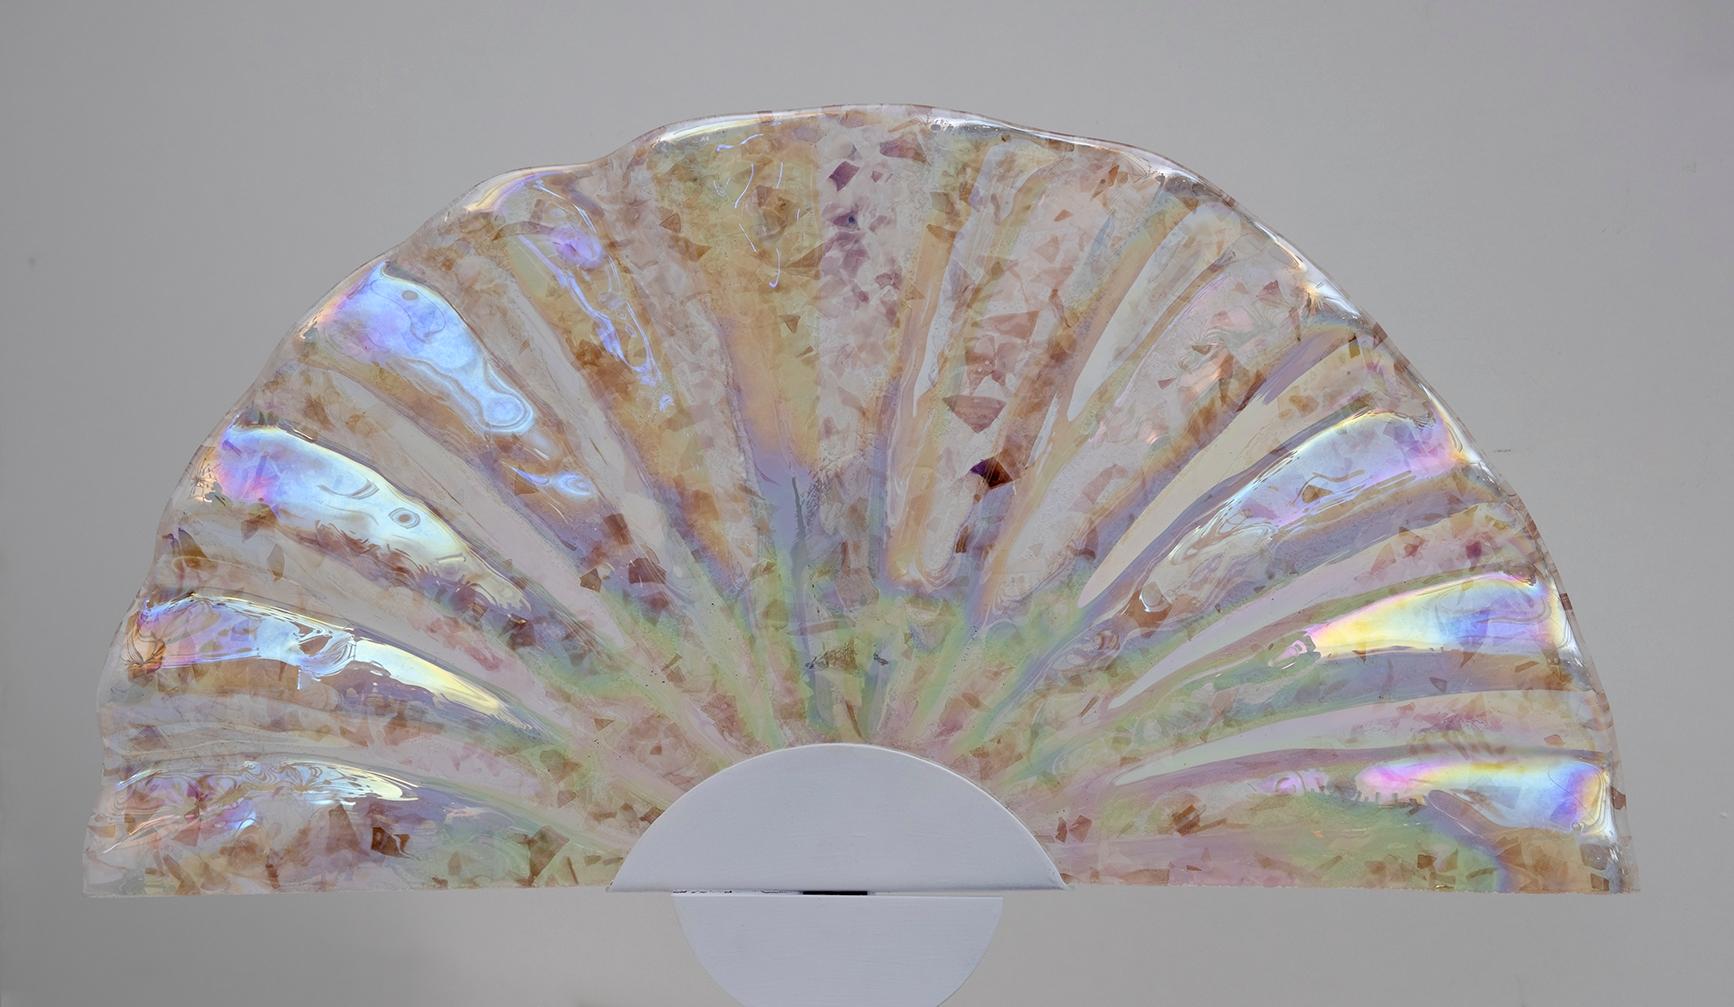 Pair of Postmodern Italian Iridescent Murano Glass Fan Table Lamps, 1980s For Sale 2